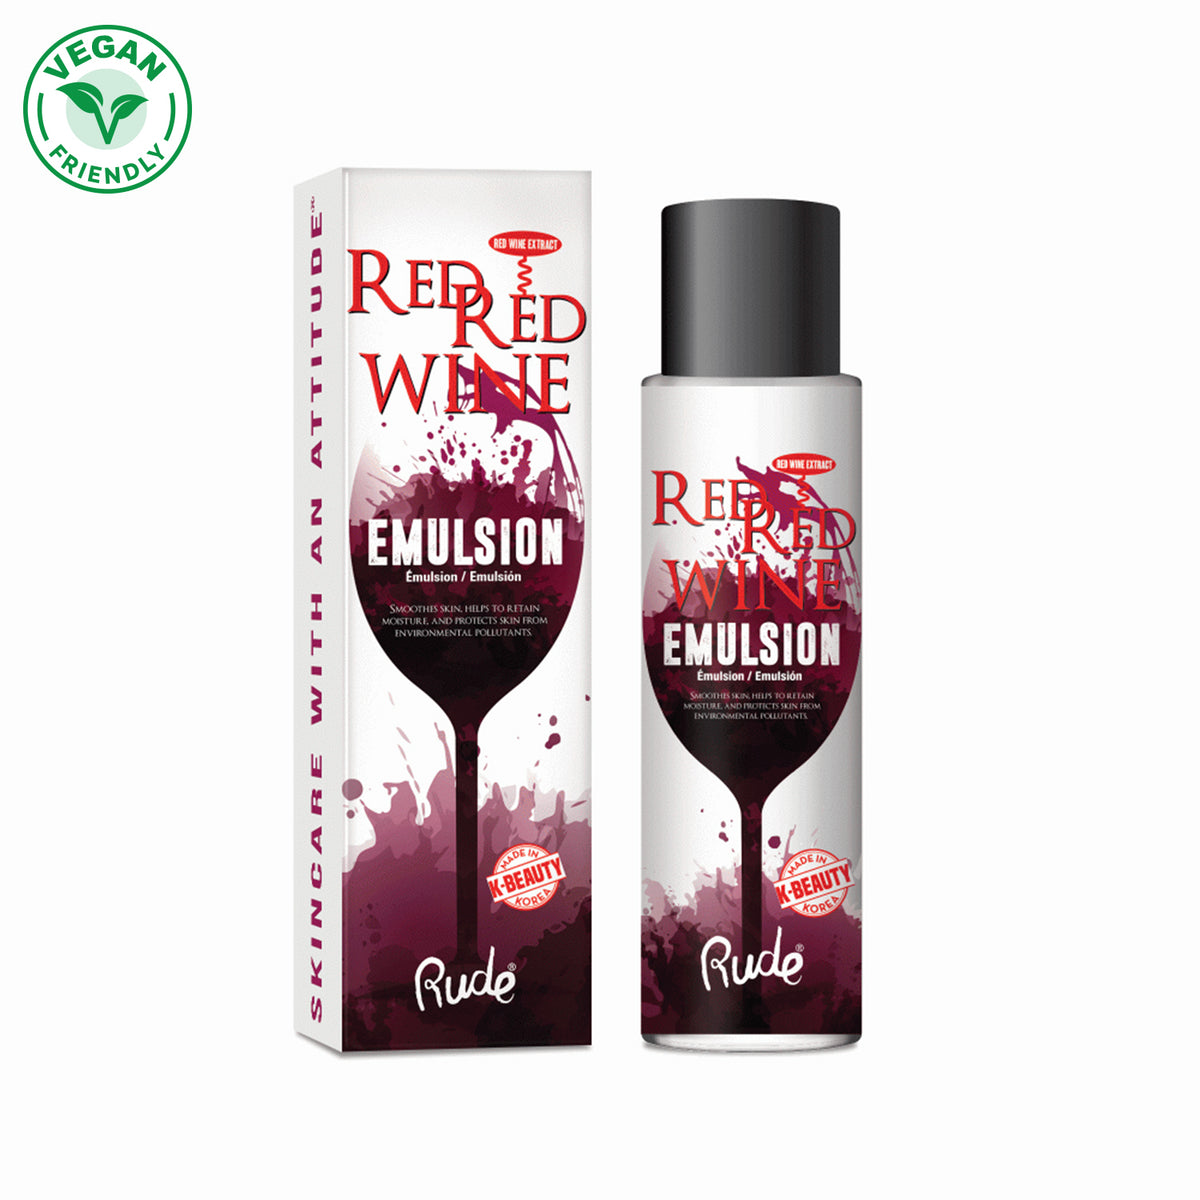 Red Red Wine Emulsion